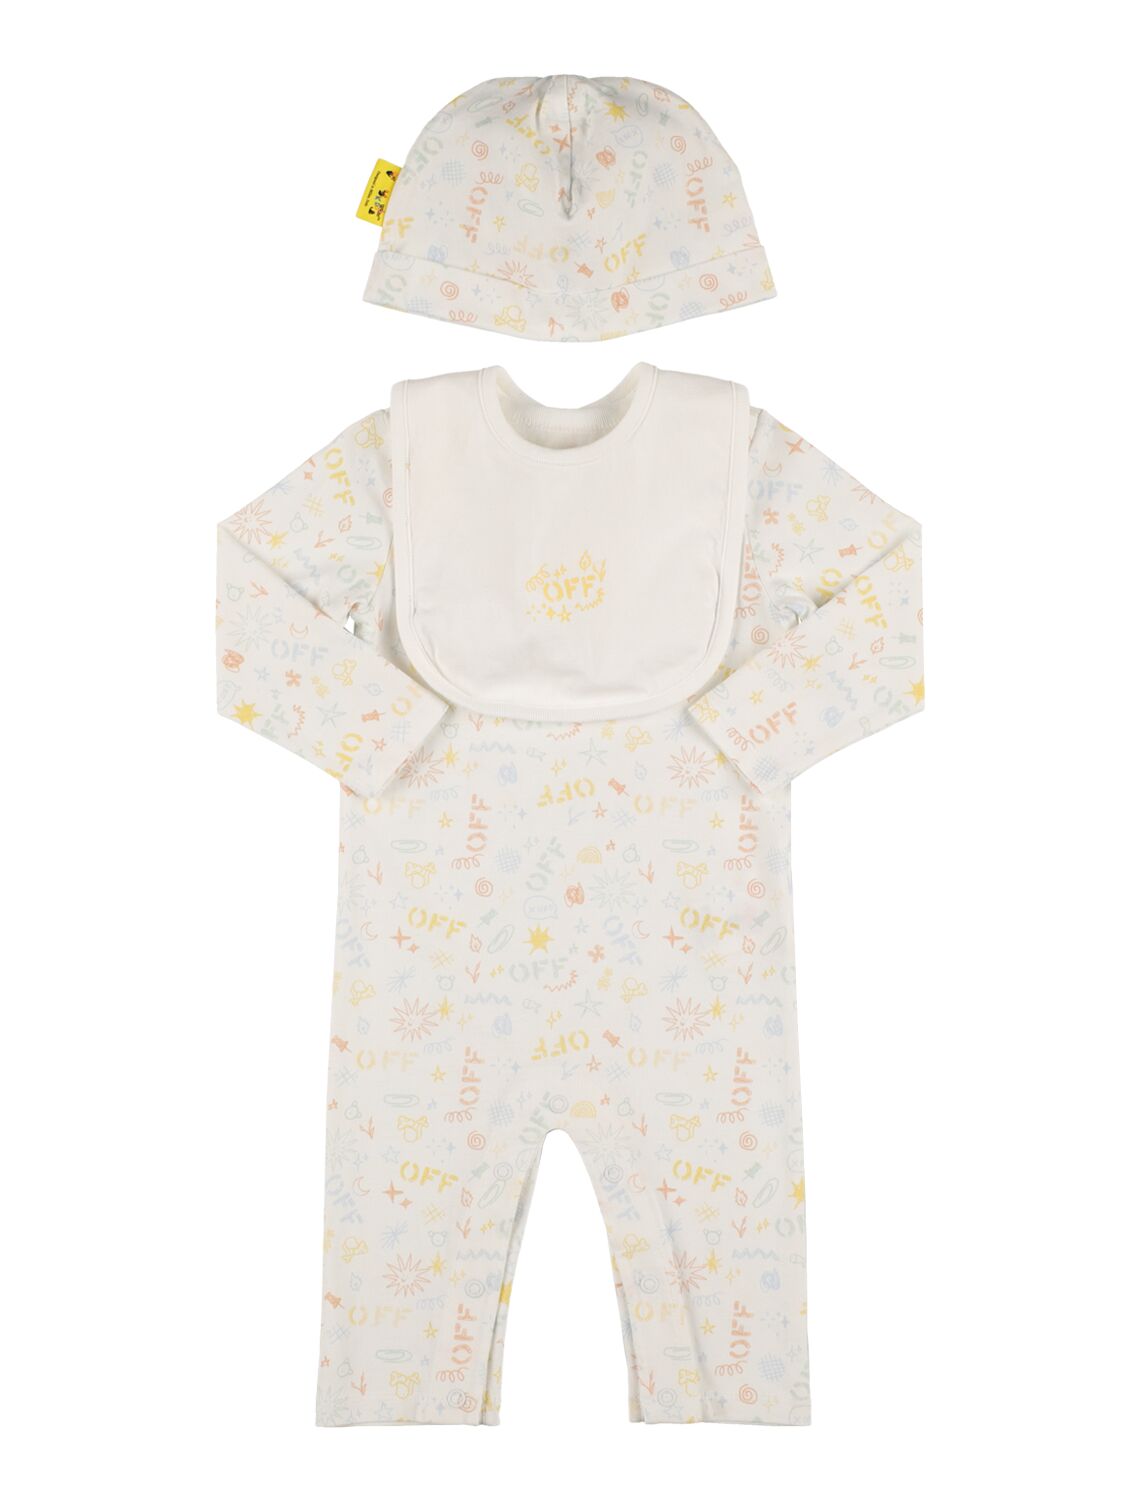 Off-white Babies' Doodle Cotton Romper, Bib & Hat In White